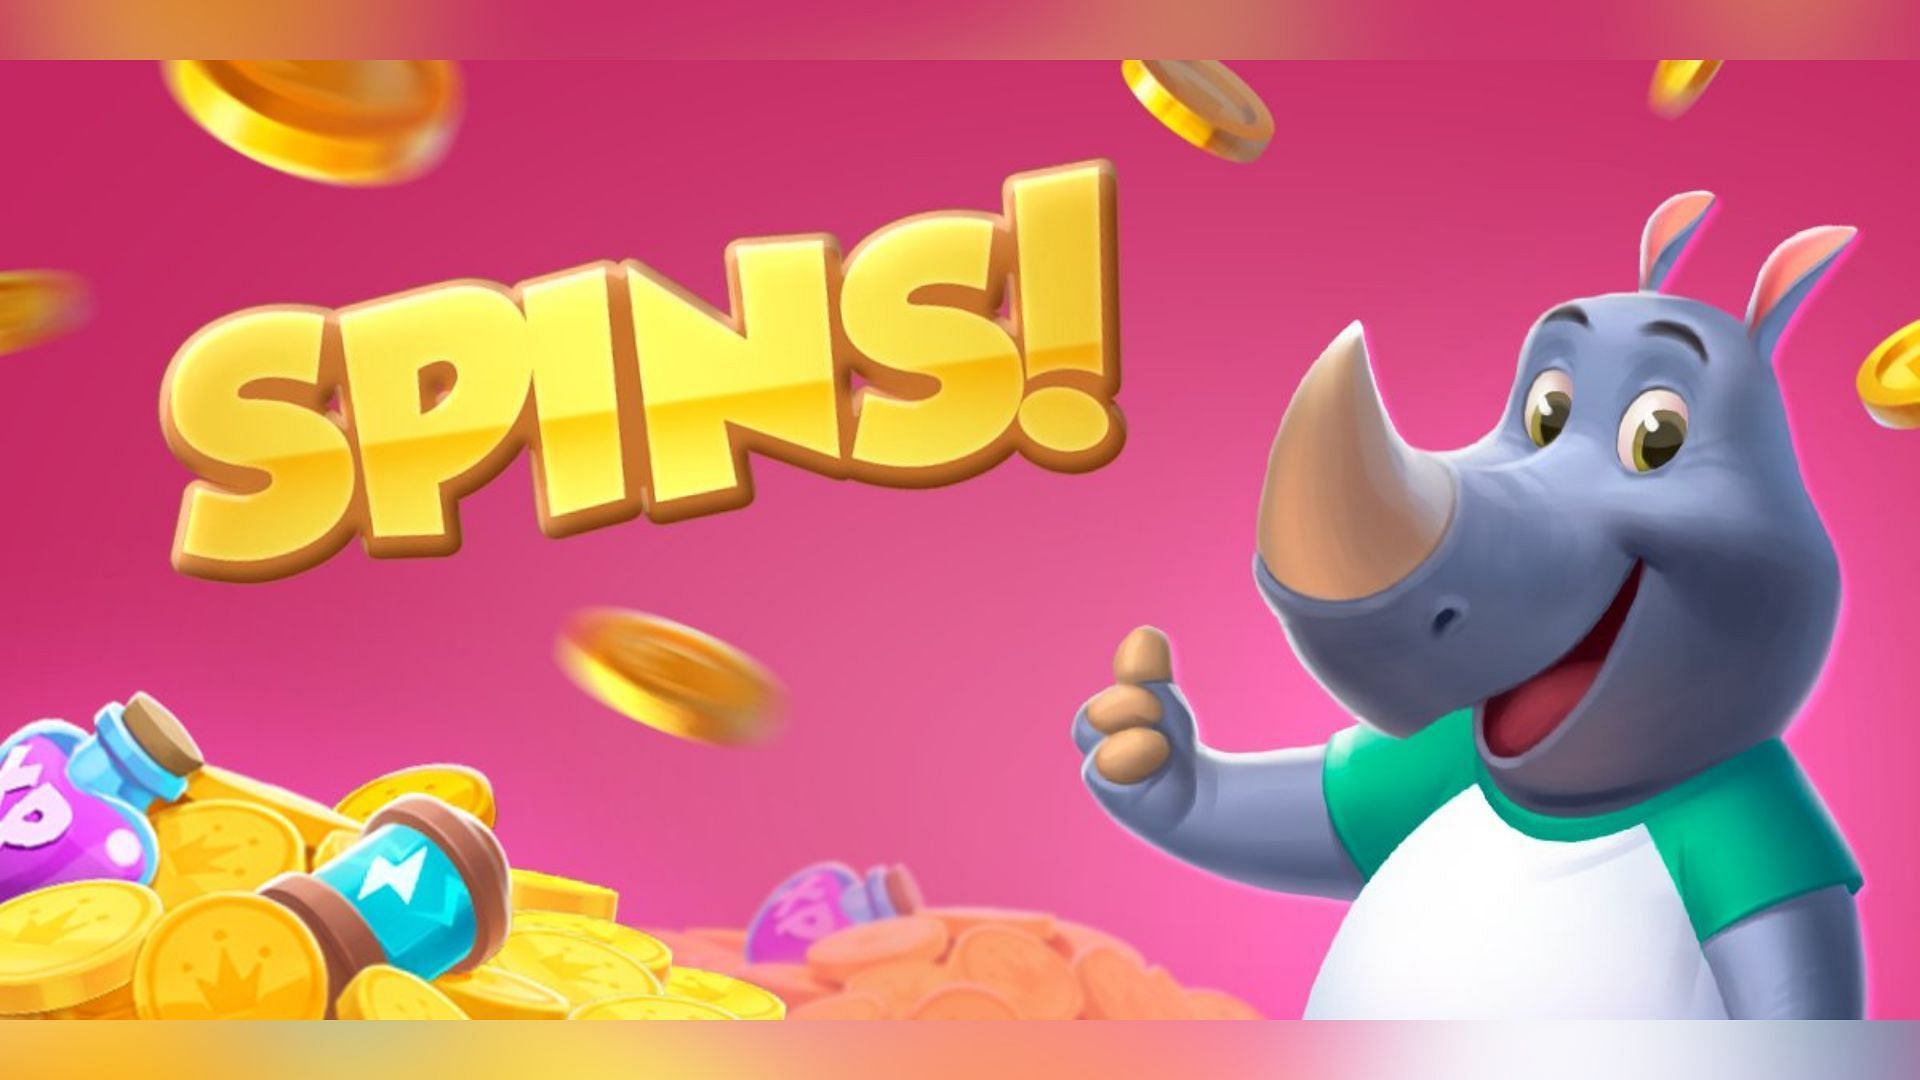 You can get daily Coin Master free spins by redeeming the links. (Image via Moon Active)